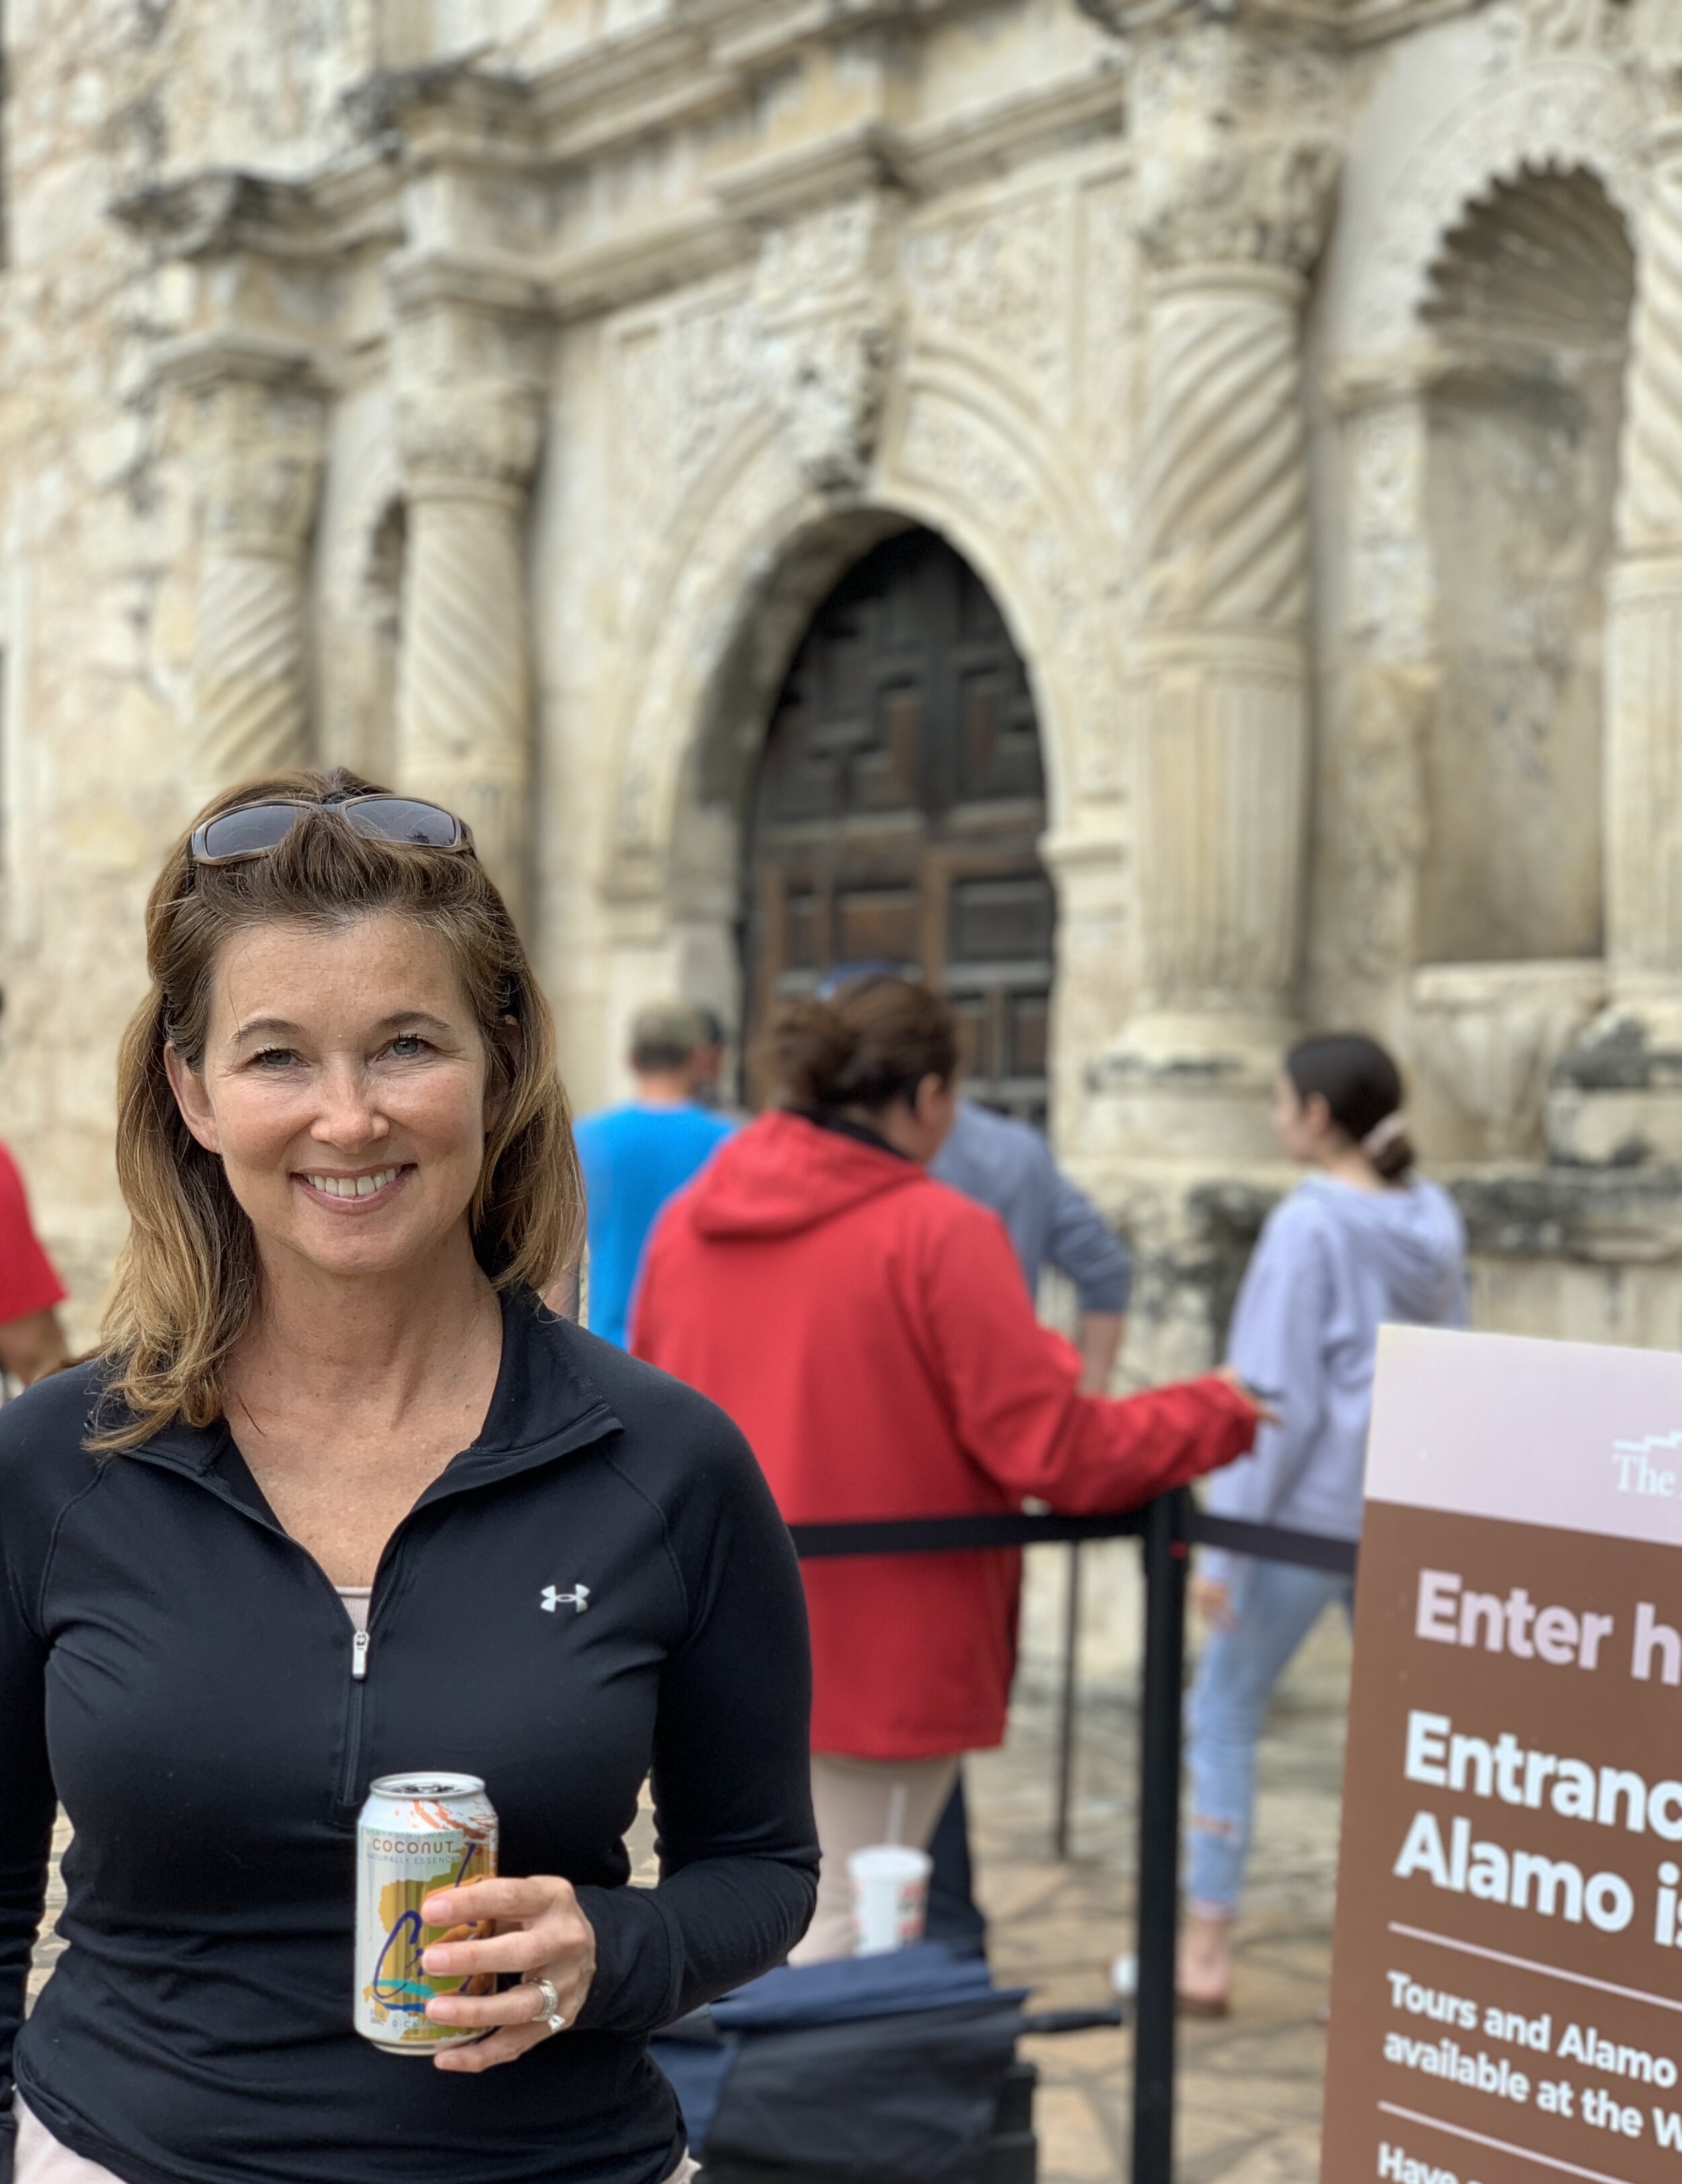  We had been forewarned that visiting The Alamo can be a little underwhelming after hearing  “Remember the Alamo!”  all your life. Although not a ton to see, it was rewarding to have a reminder of the meaning and context of the phrase and to see the 